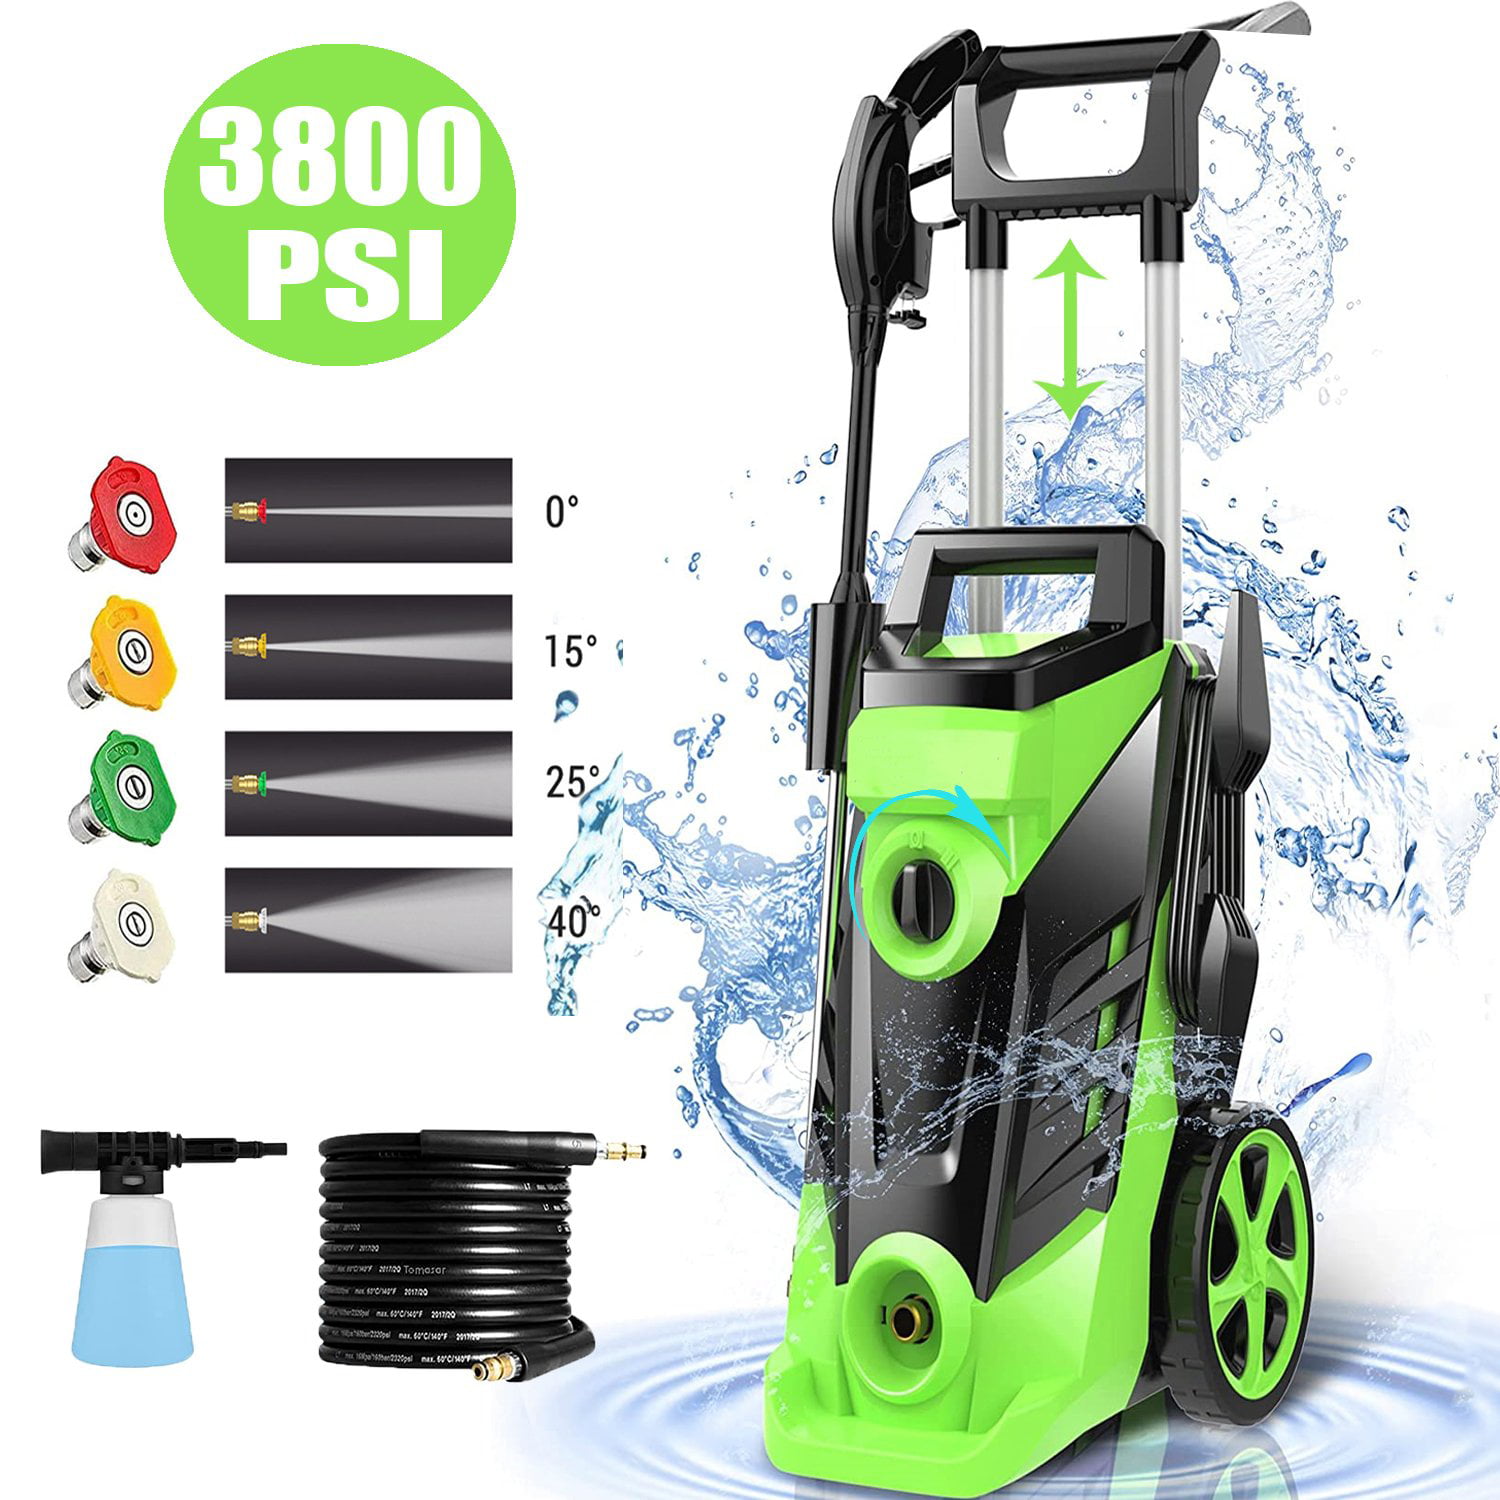 Details about   3800PSI  Electric Pressure Washer High Power Water Cleaner Sprayer 4Nozzle US